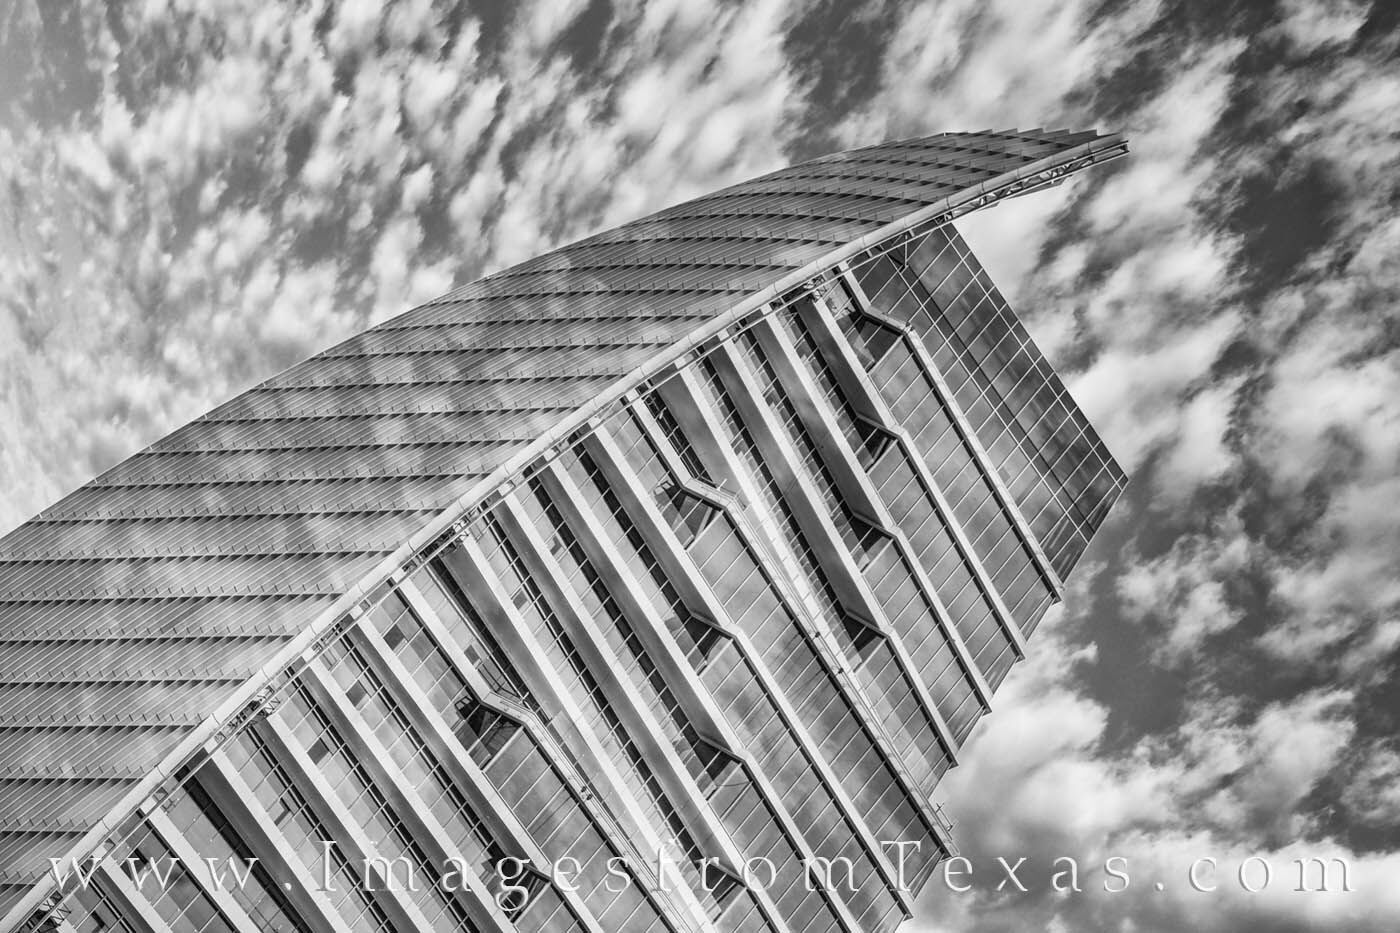 The Google building in downtown Austin, Texas, merges into a partly cloudy sky on a cool morning in this black and white image...